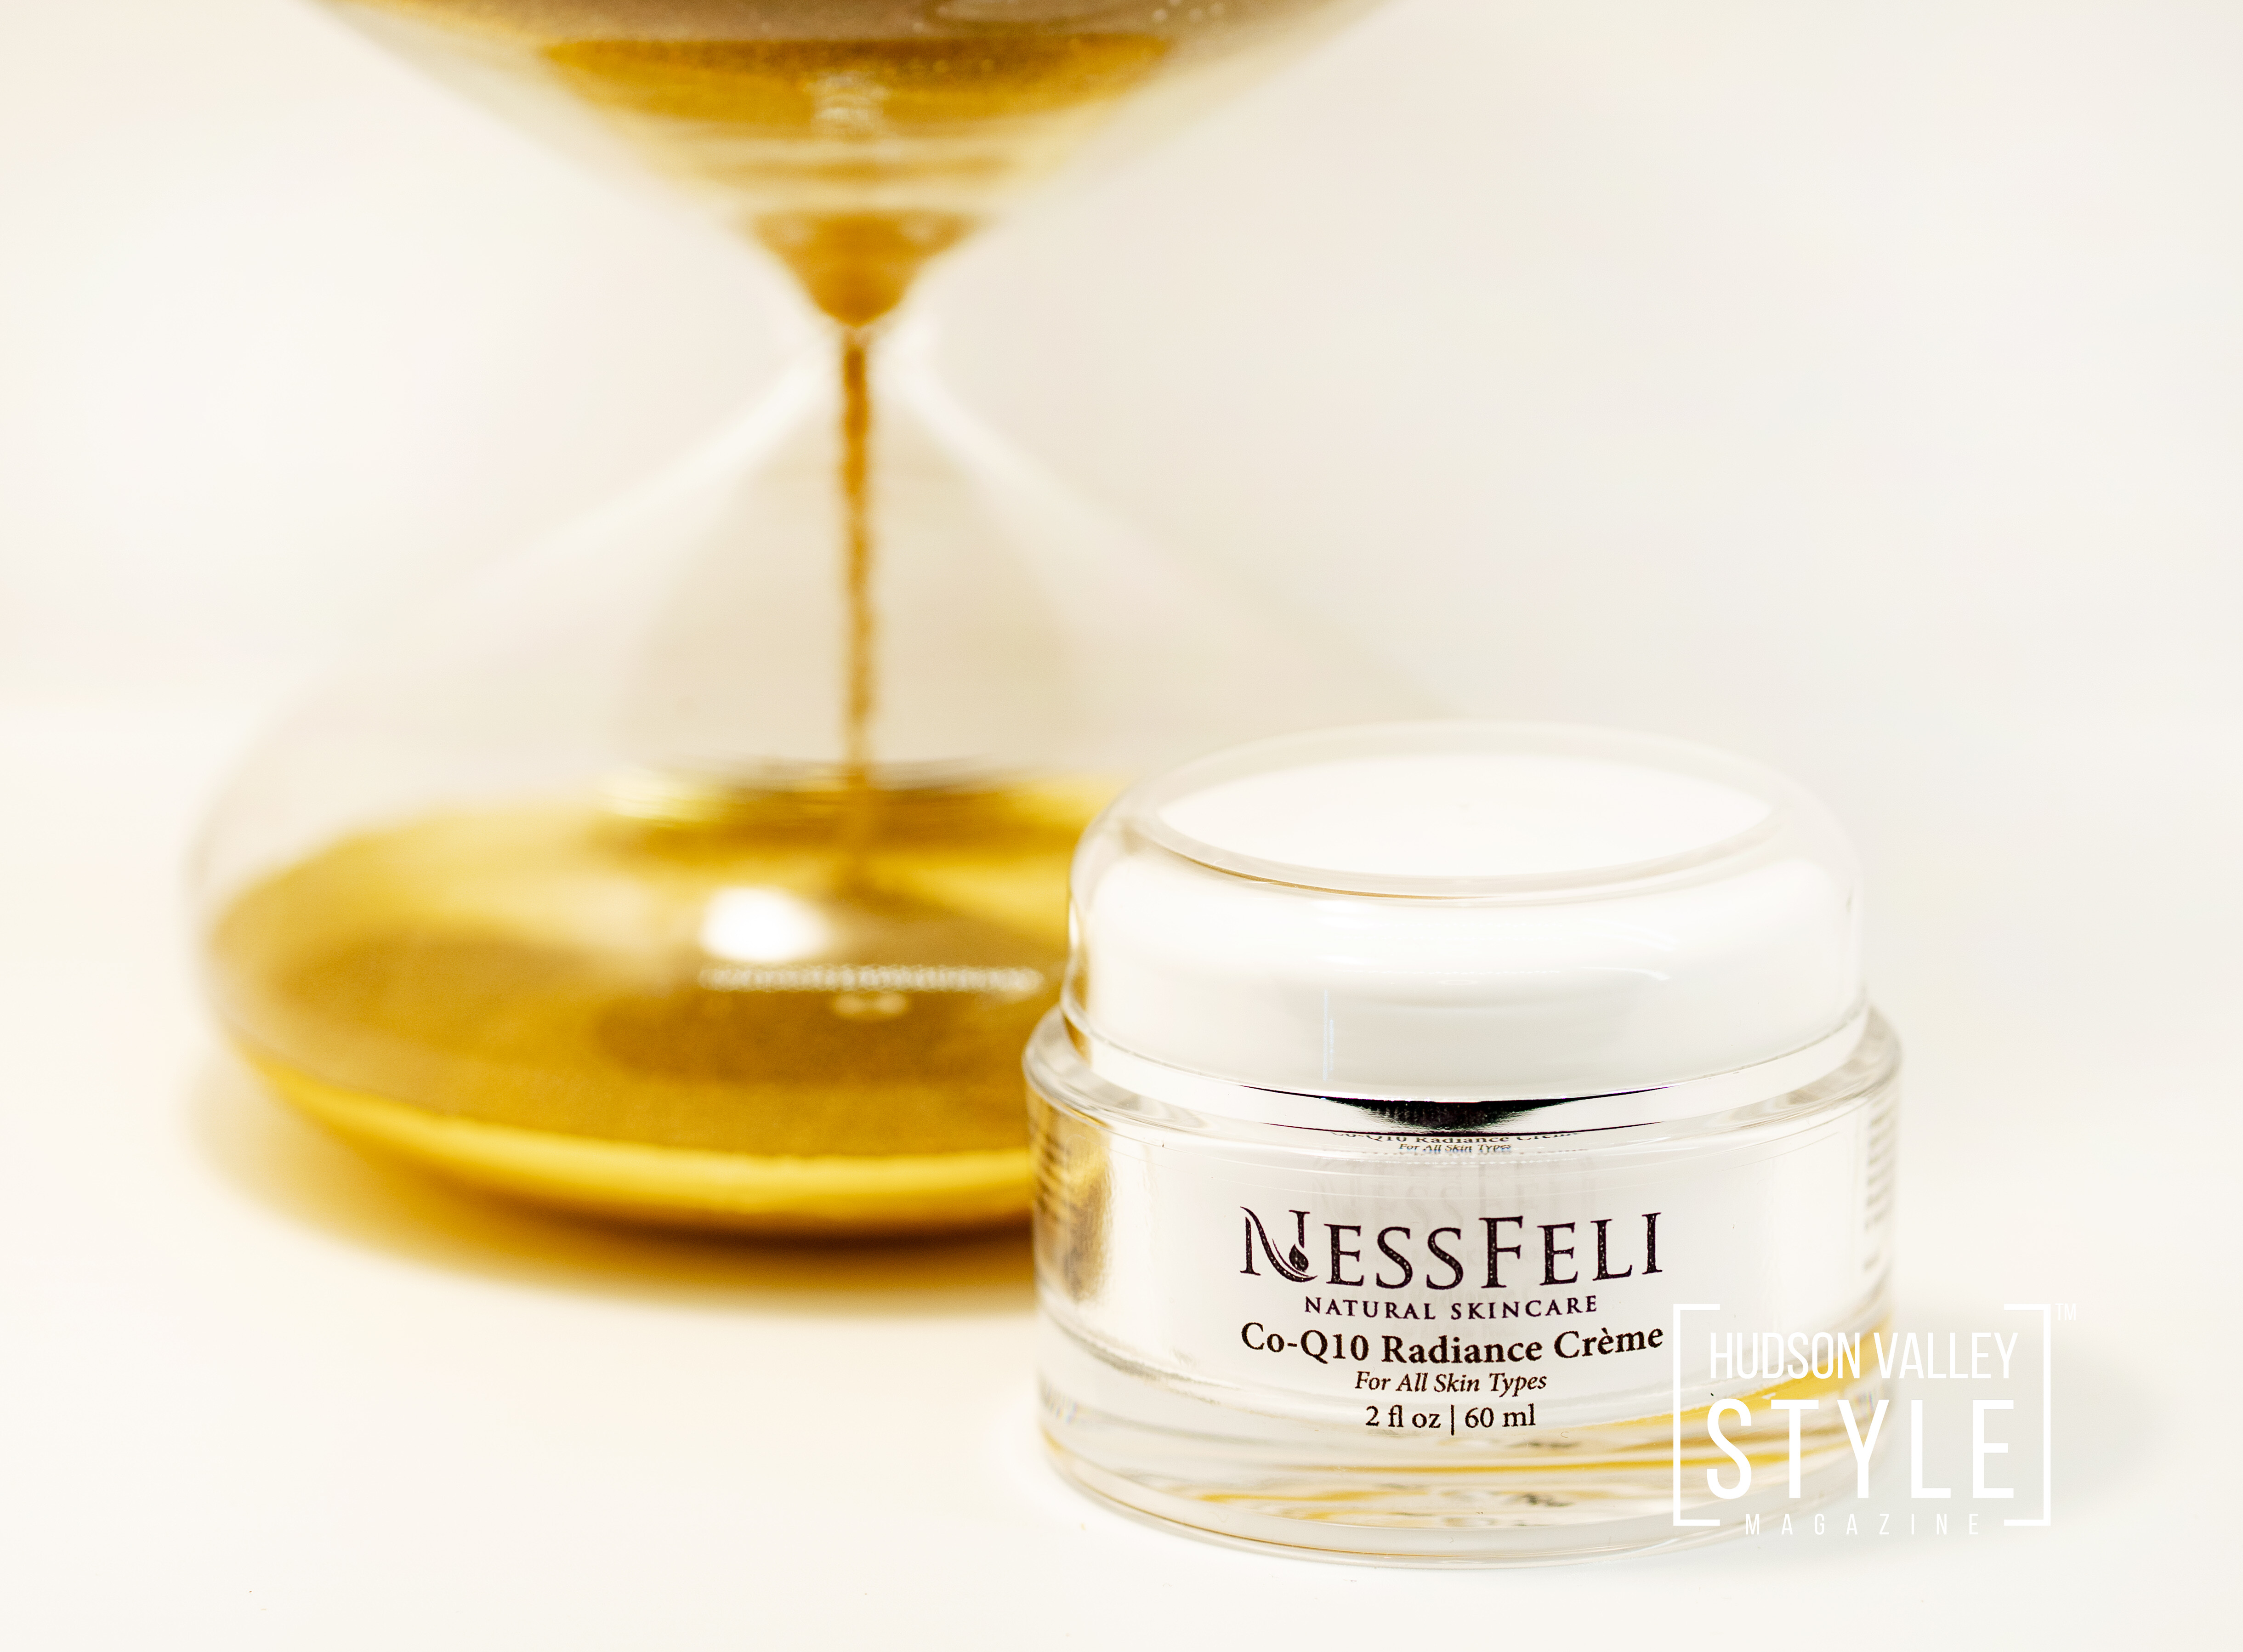 Co-Q10 Radiance Crème by Nessfeli Natural Skincare – Hudson Valley Style Magazine Gift Guide